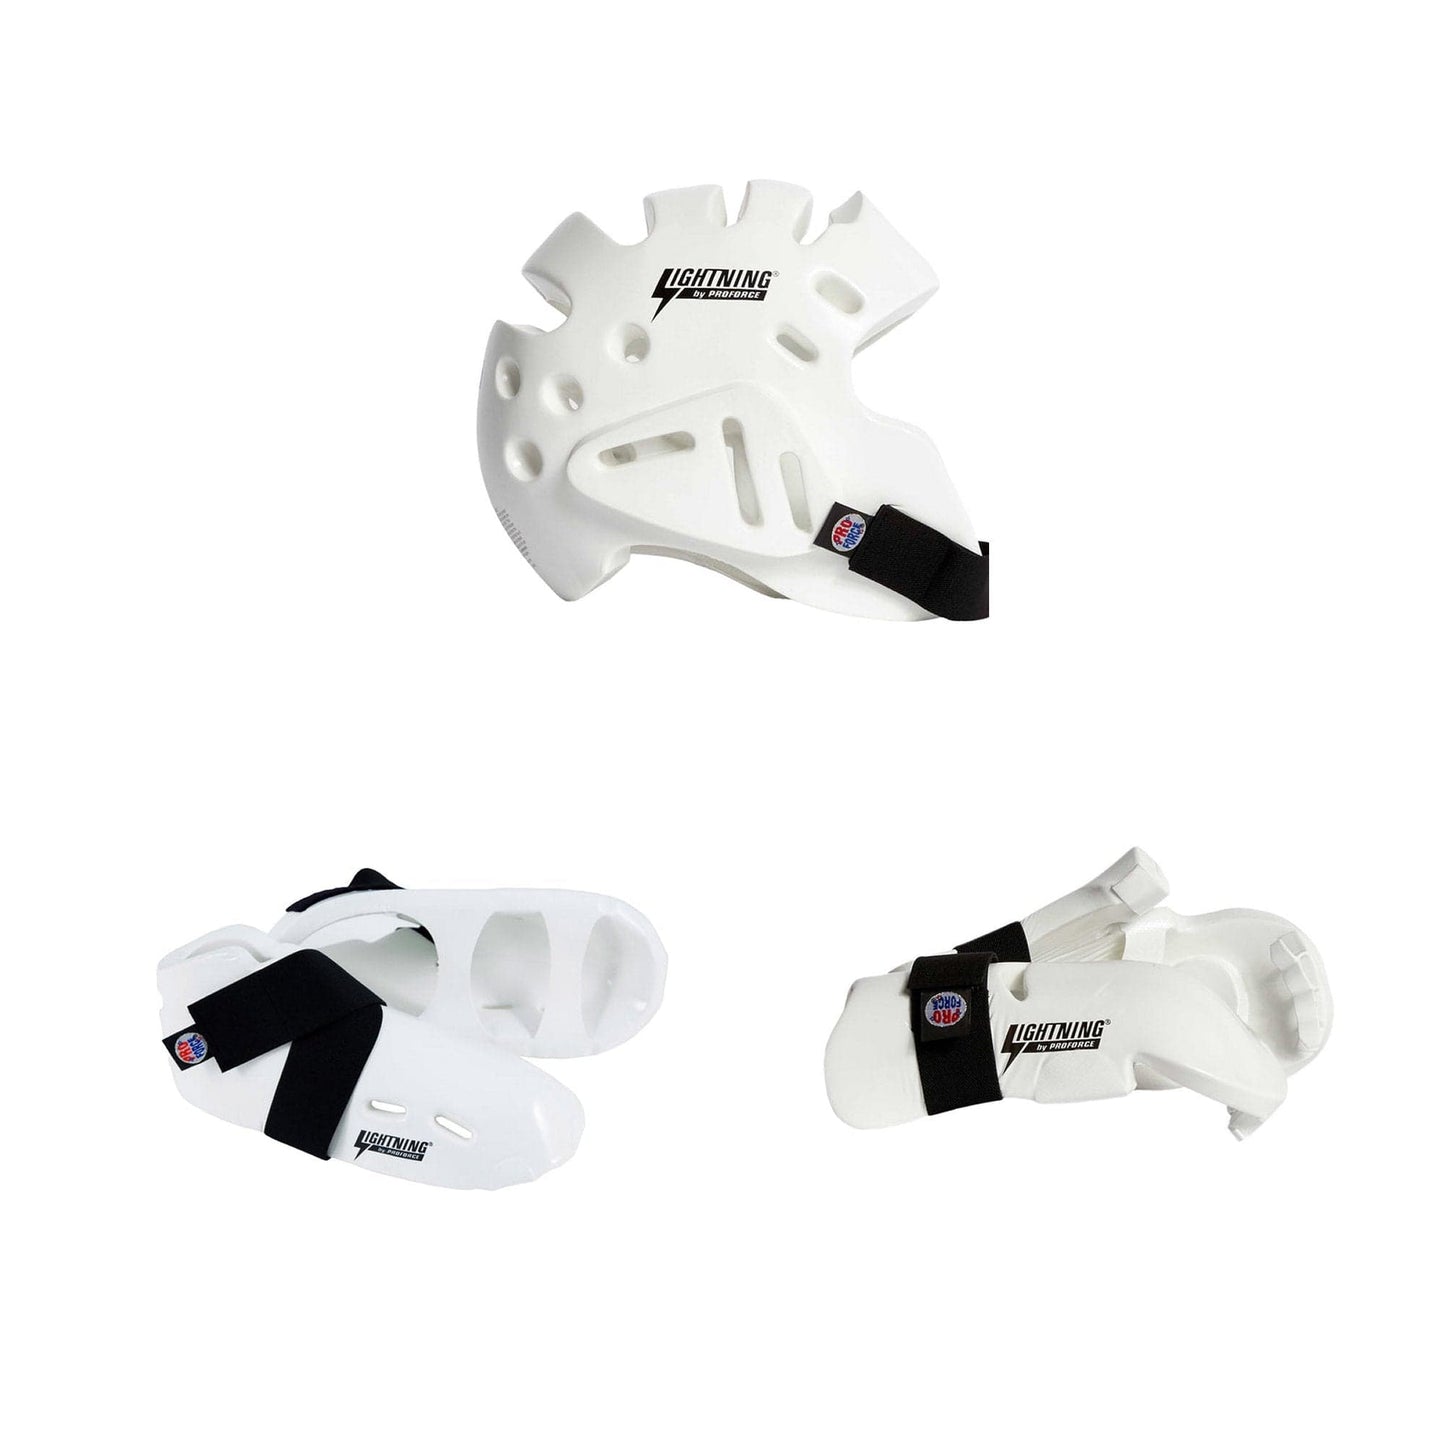 ProForce sporting goods ch xs/12-13 / Small ProForce Lighting 5 Piece Sparring Gear Combo Set WHITE